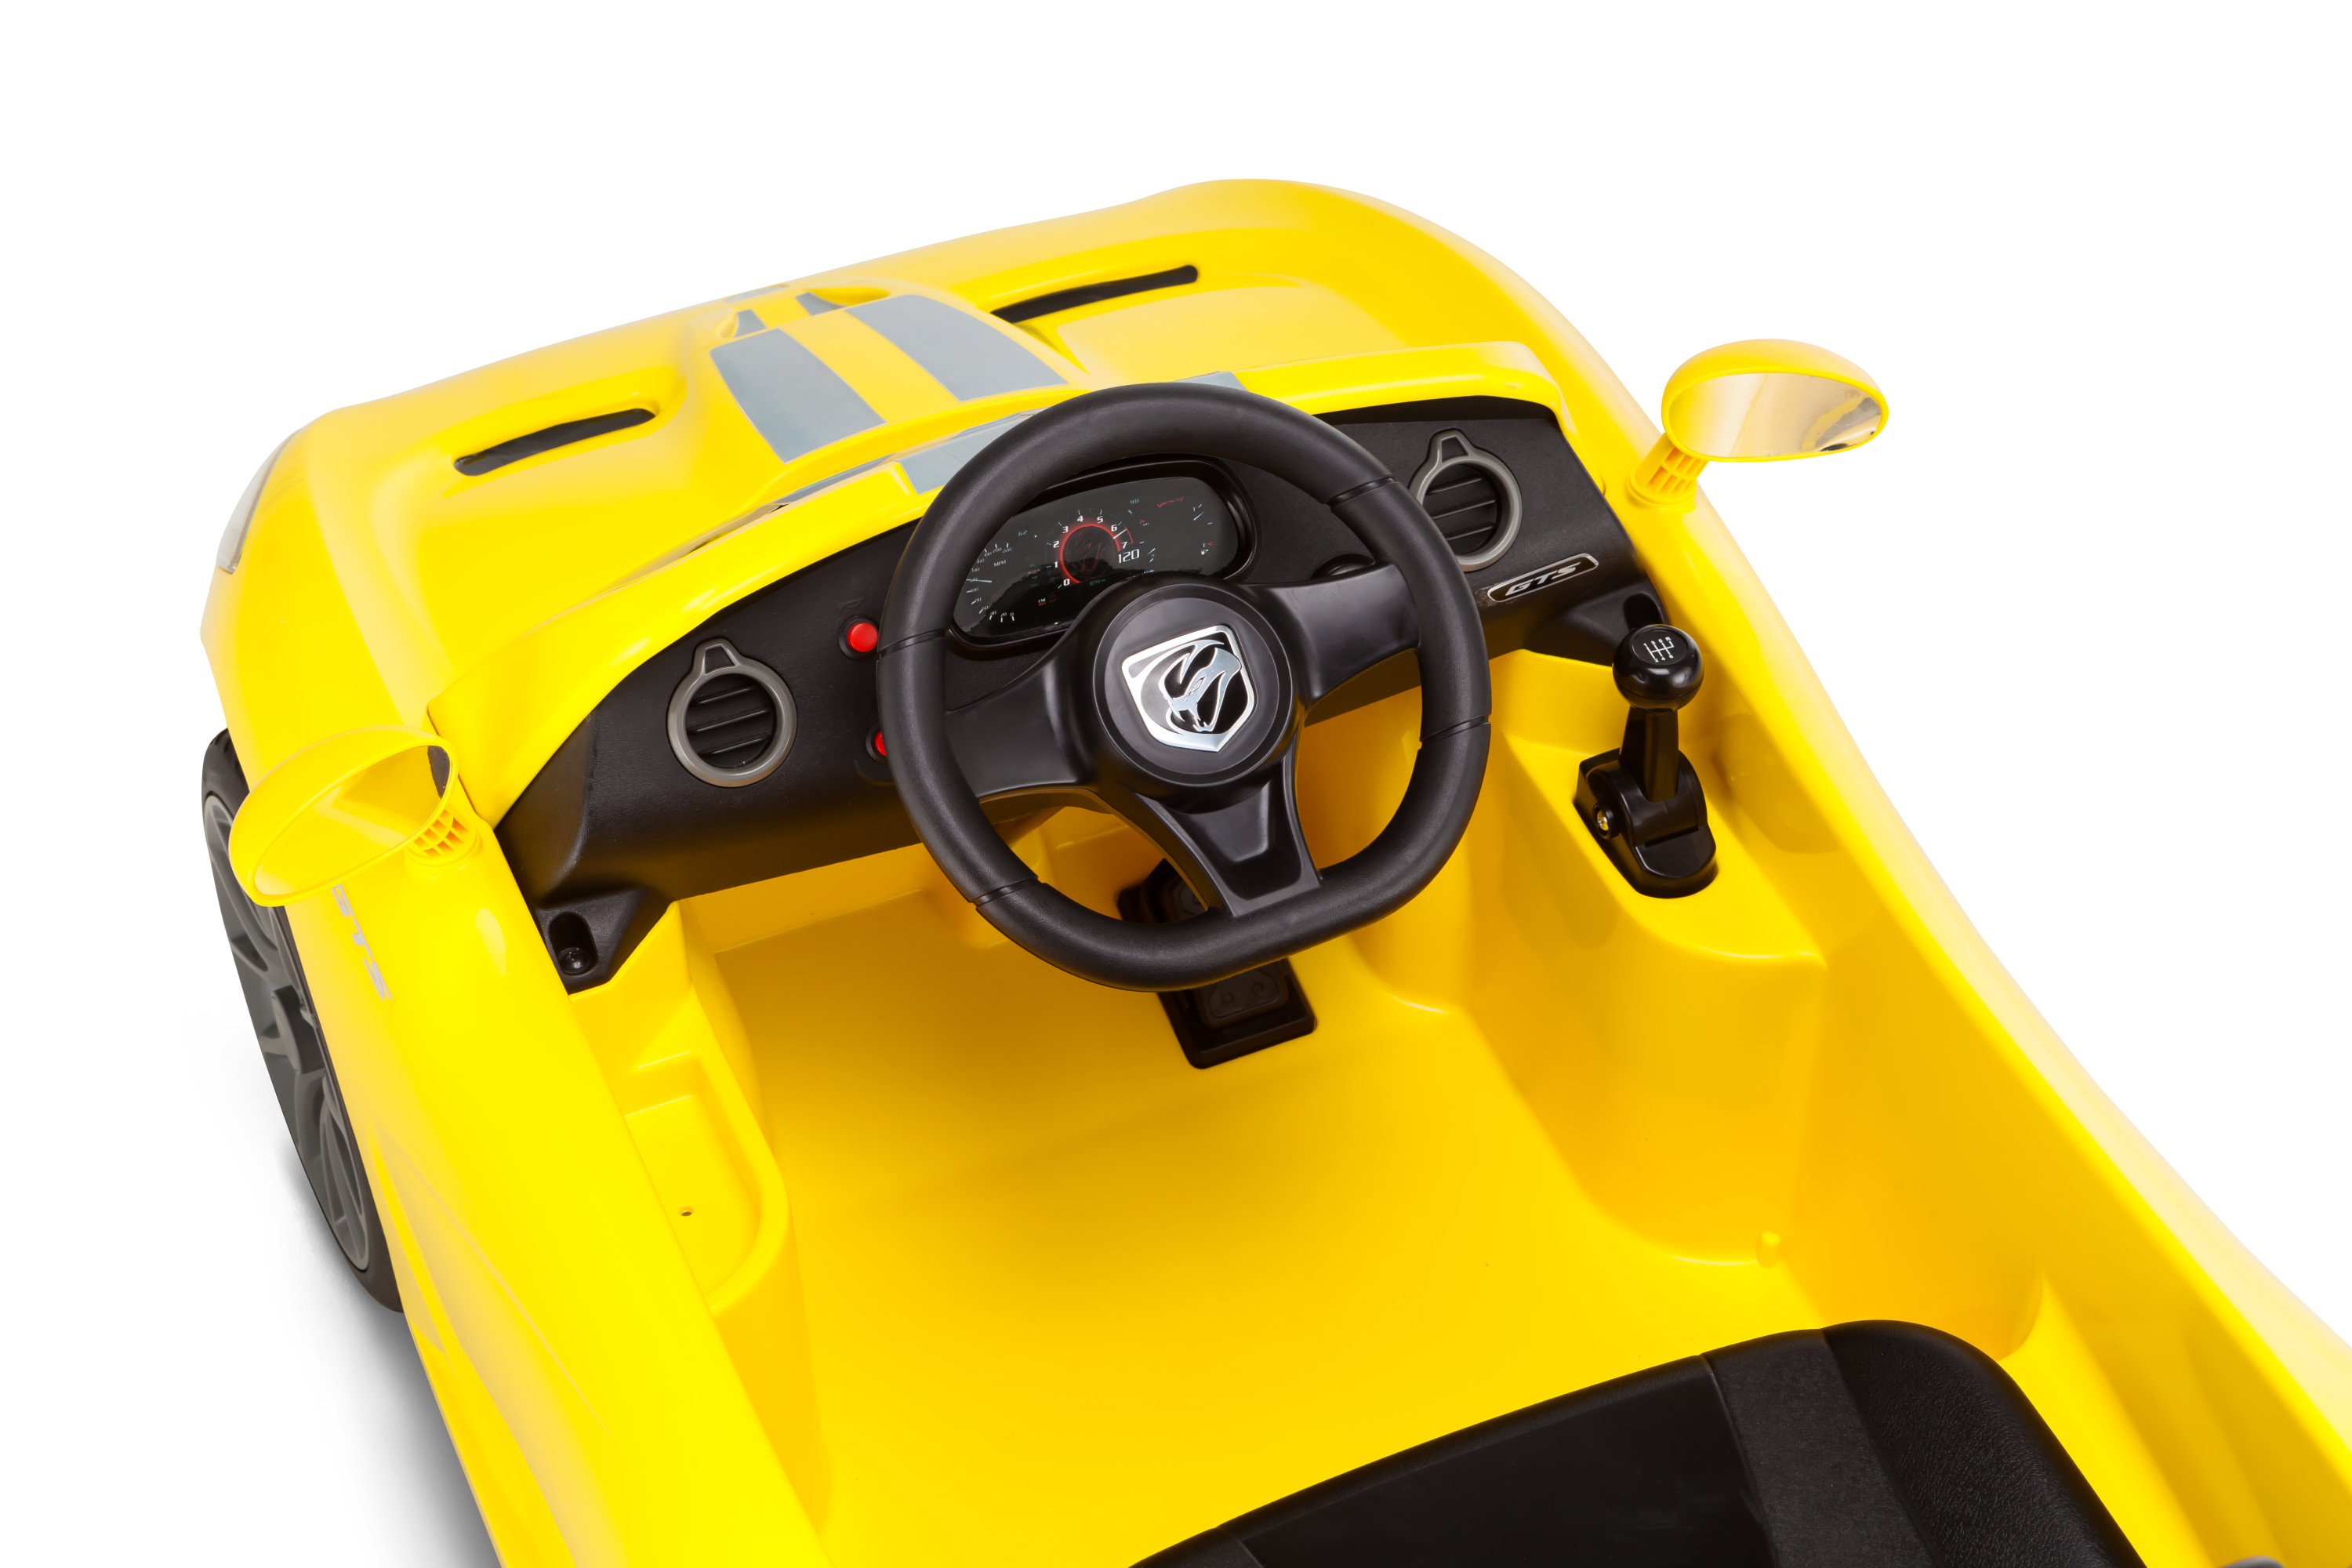 Dodge Viper SRT, 6-Volt Ride-On Toy by Kid Trax, single passenger, yellow - image 2 of 4